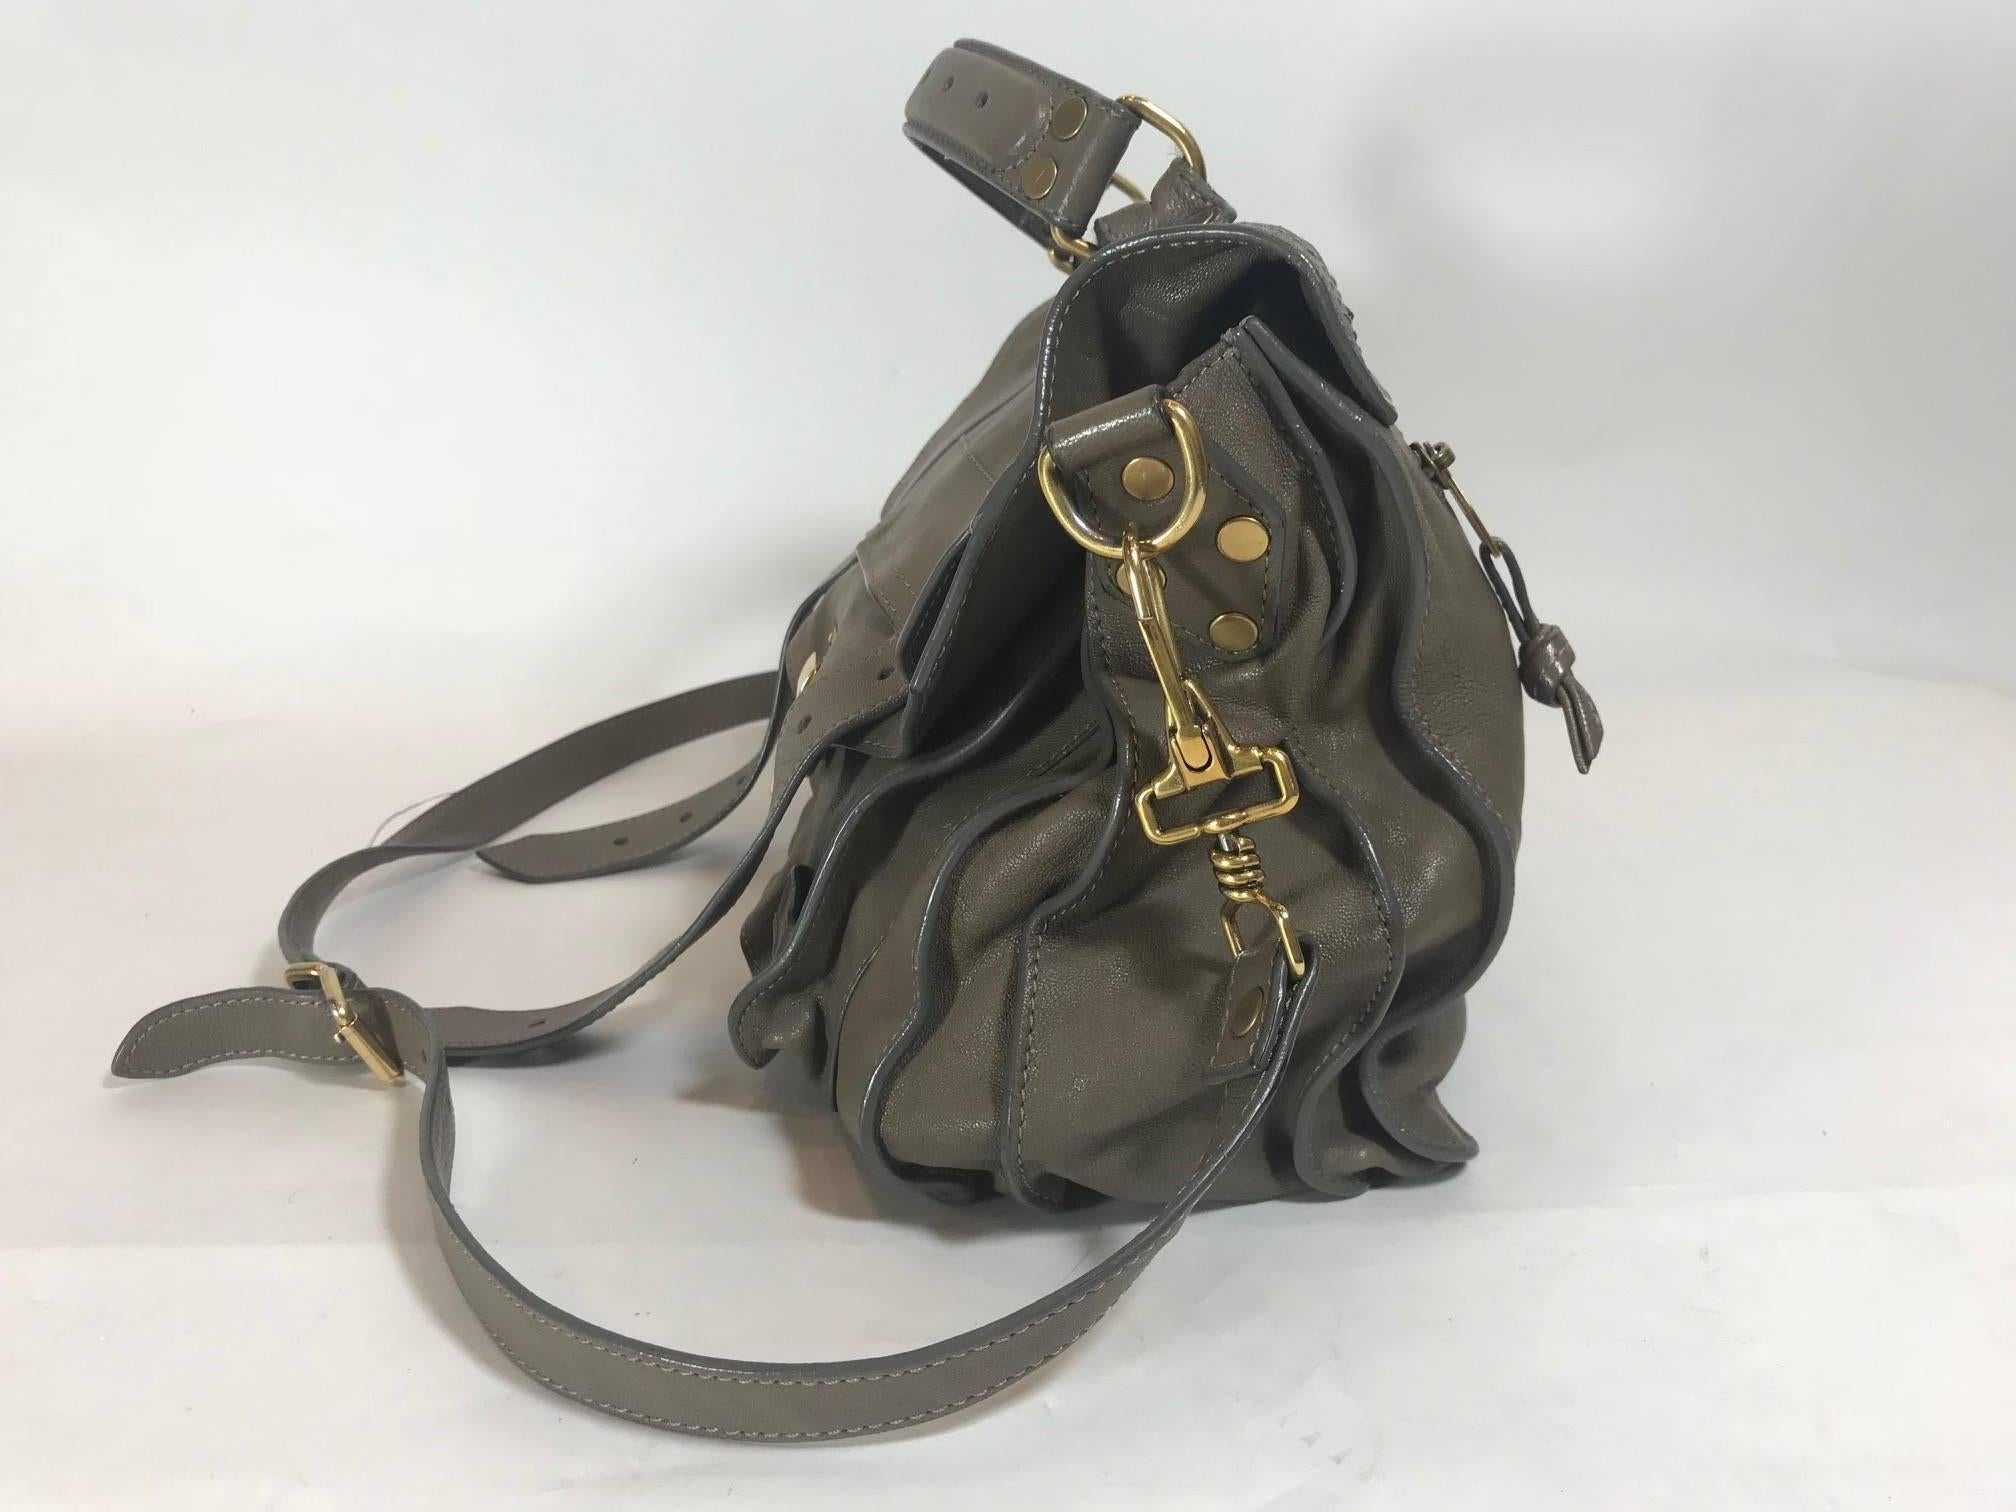 Taupe leather. Gold-tone hardware. Flip-lock featuring dual pull-through closures at front flap. Detachable flat shoulder strap. Single flat top handle. Exterior zip pocket at back. Dual pockets at flap underside. Grey jacquard woven lining. Single